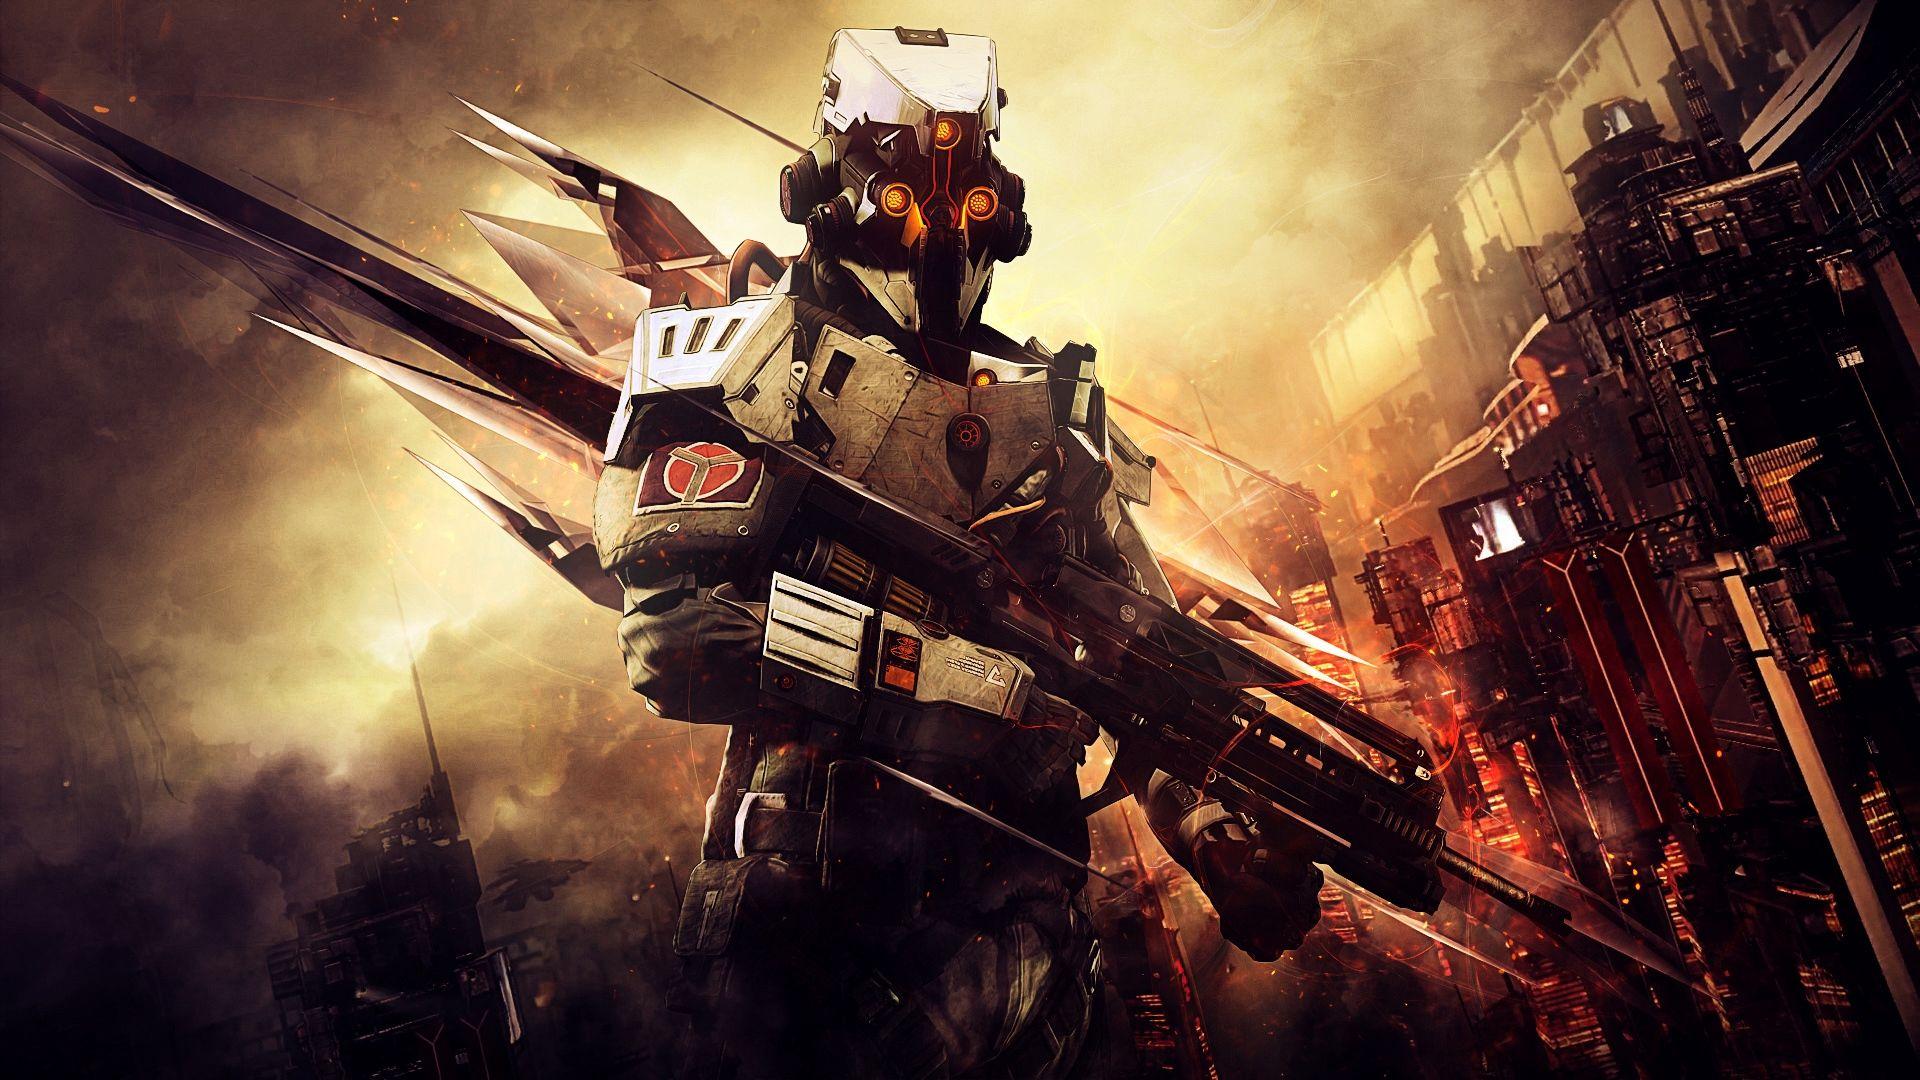 Download wallpapers 1920x1080 killzone shadow fall, helghast.